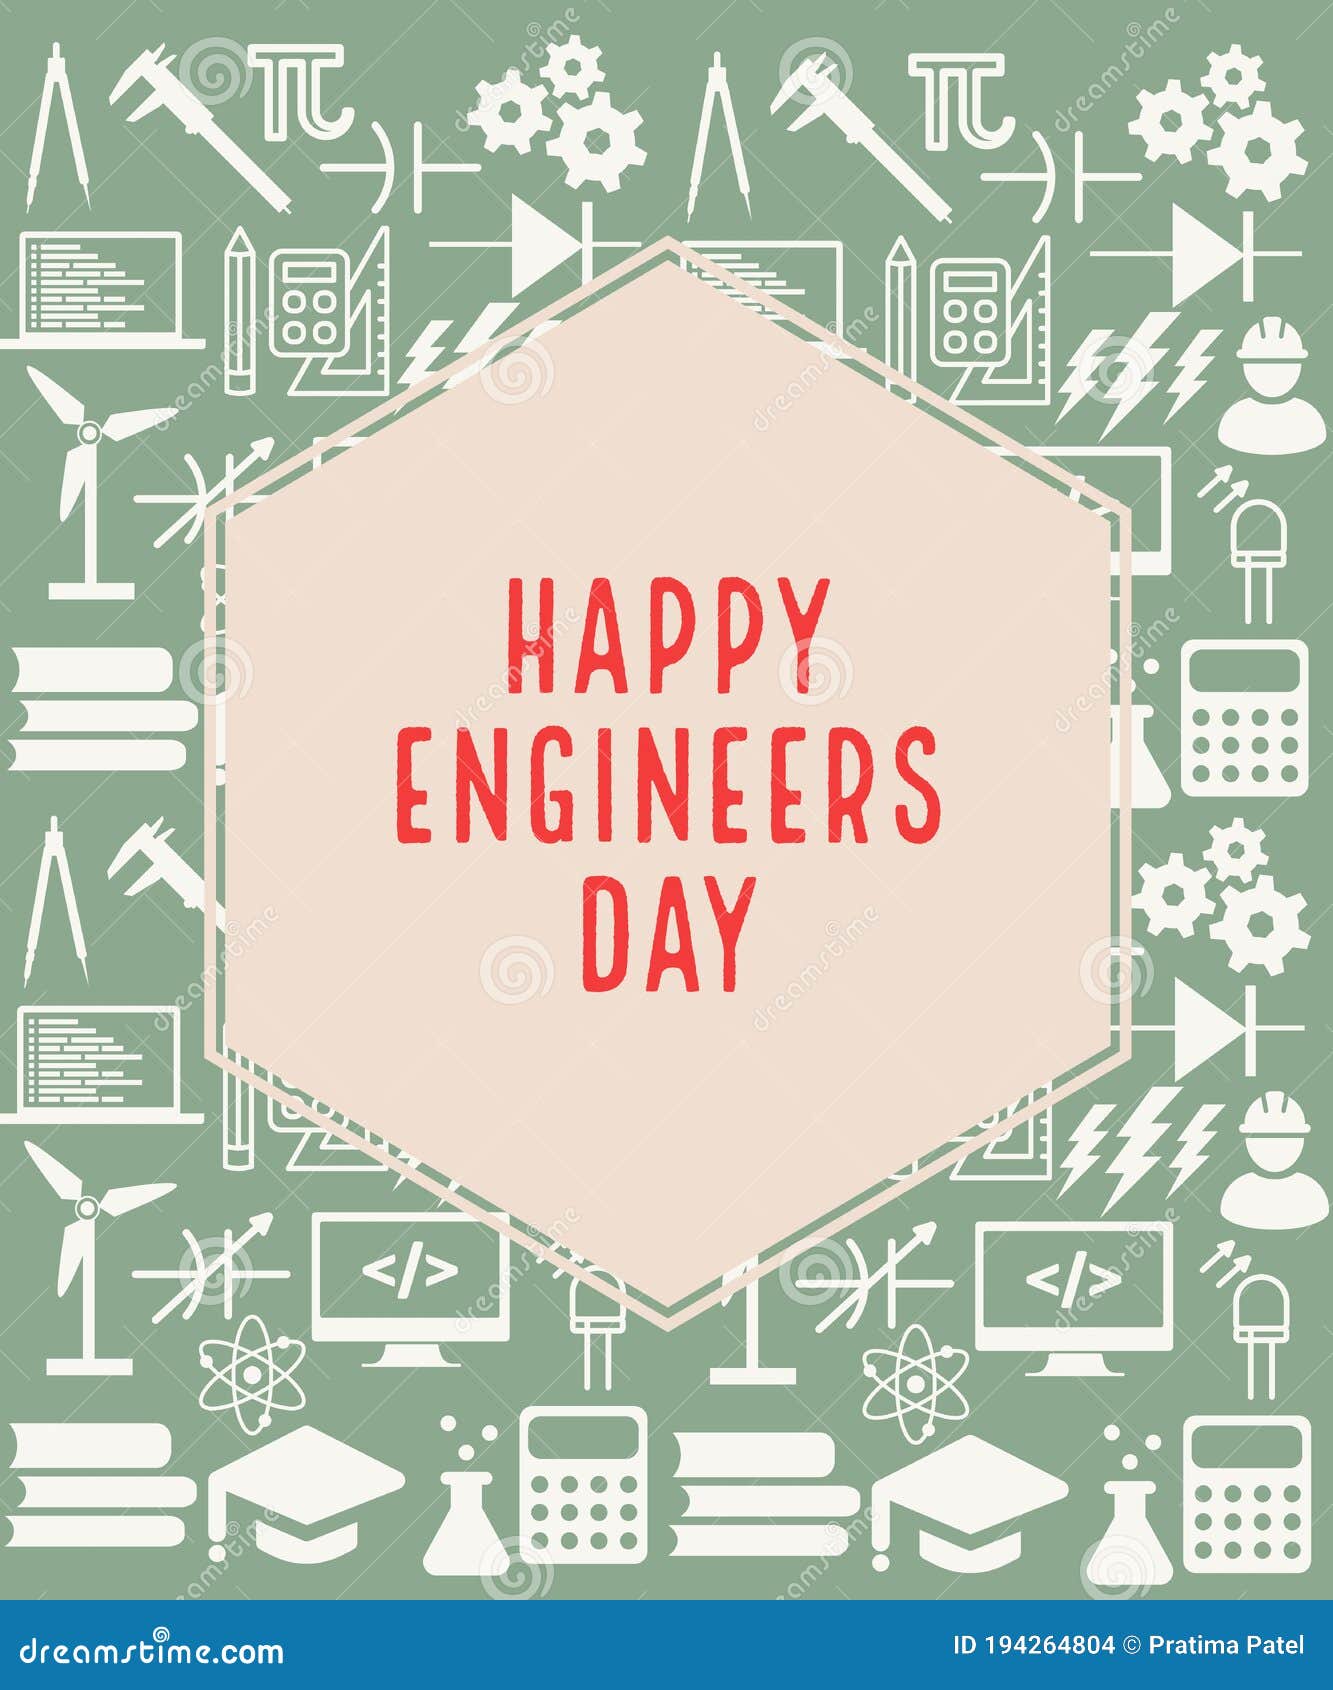 Happy Engineers Day Wish Greeting Card Abstract Background, Set of Icons,  Education Concept, Graphic Design Illustration Wallpaper Stock Illustration  - Illustration of brand, presentation: 194264804